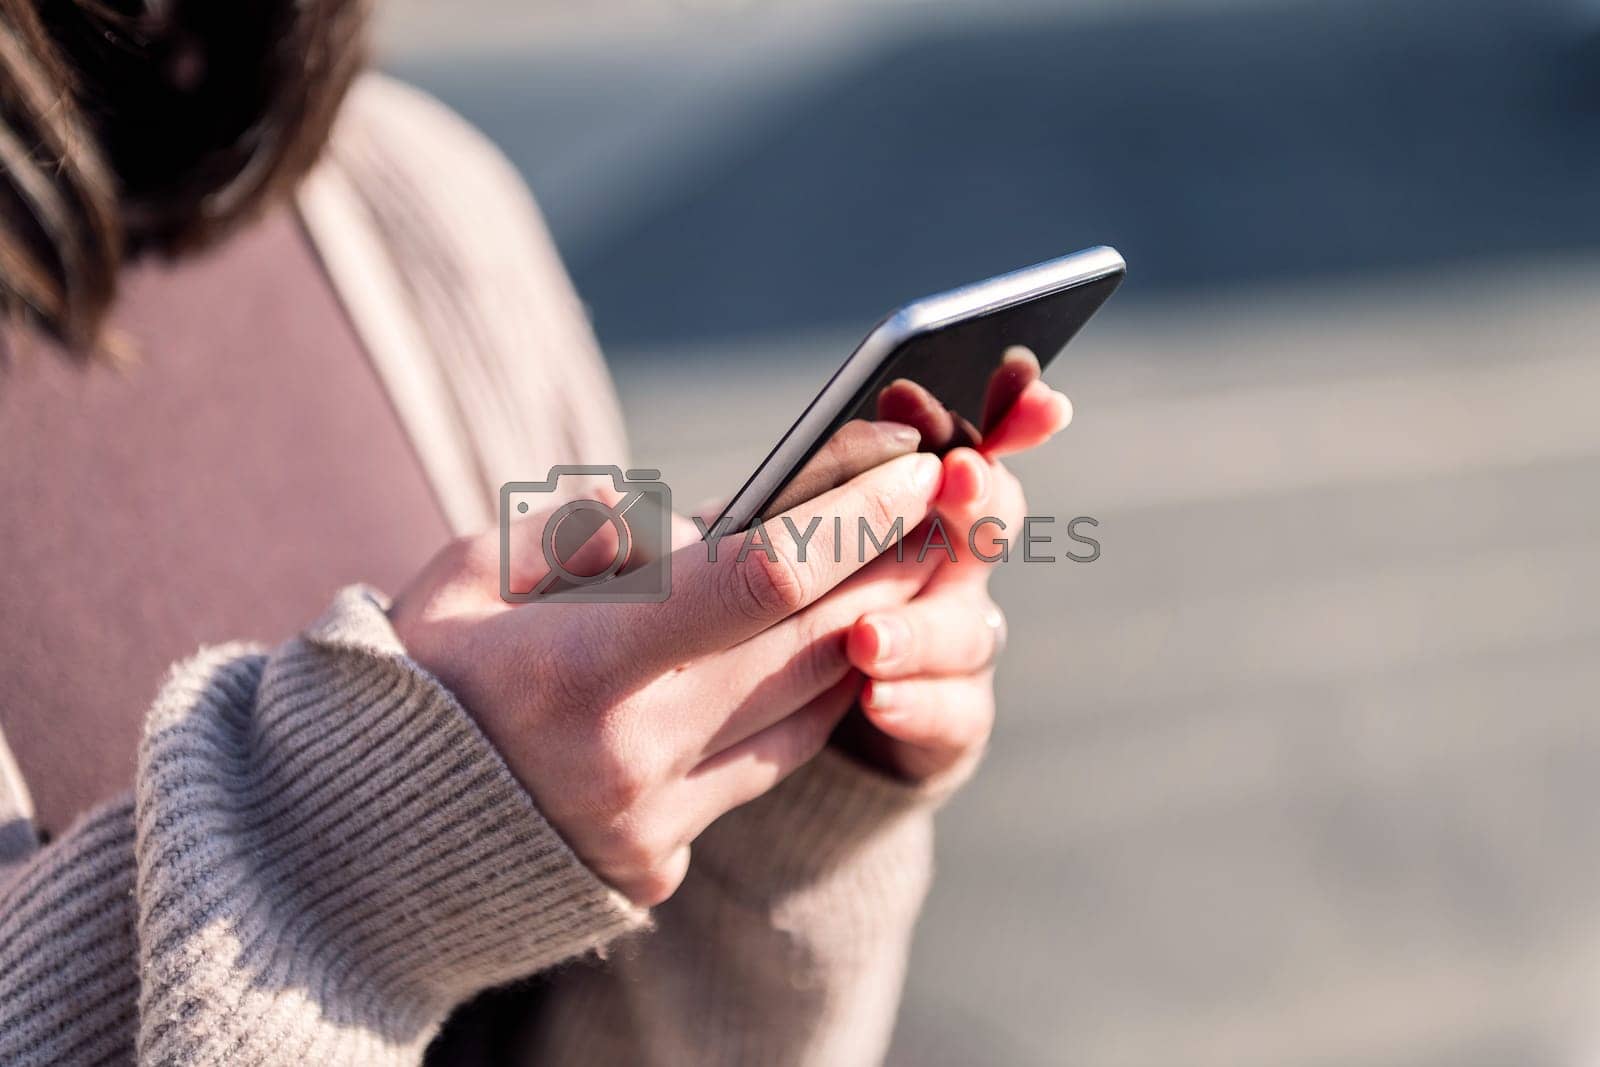 Royalty free image of close up of hands of woman using mobile phone by raulmelldo